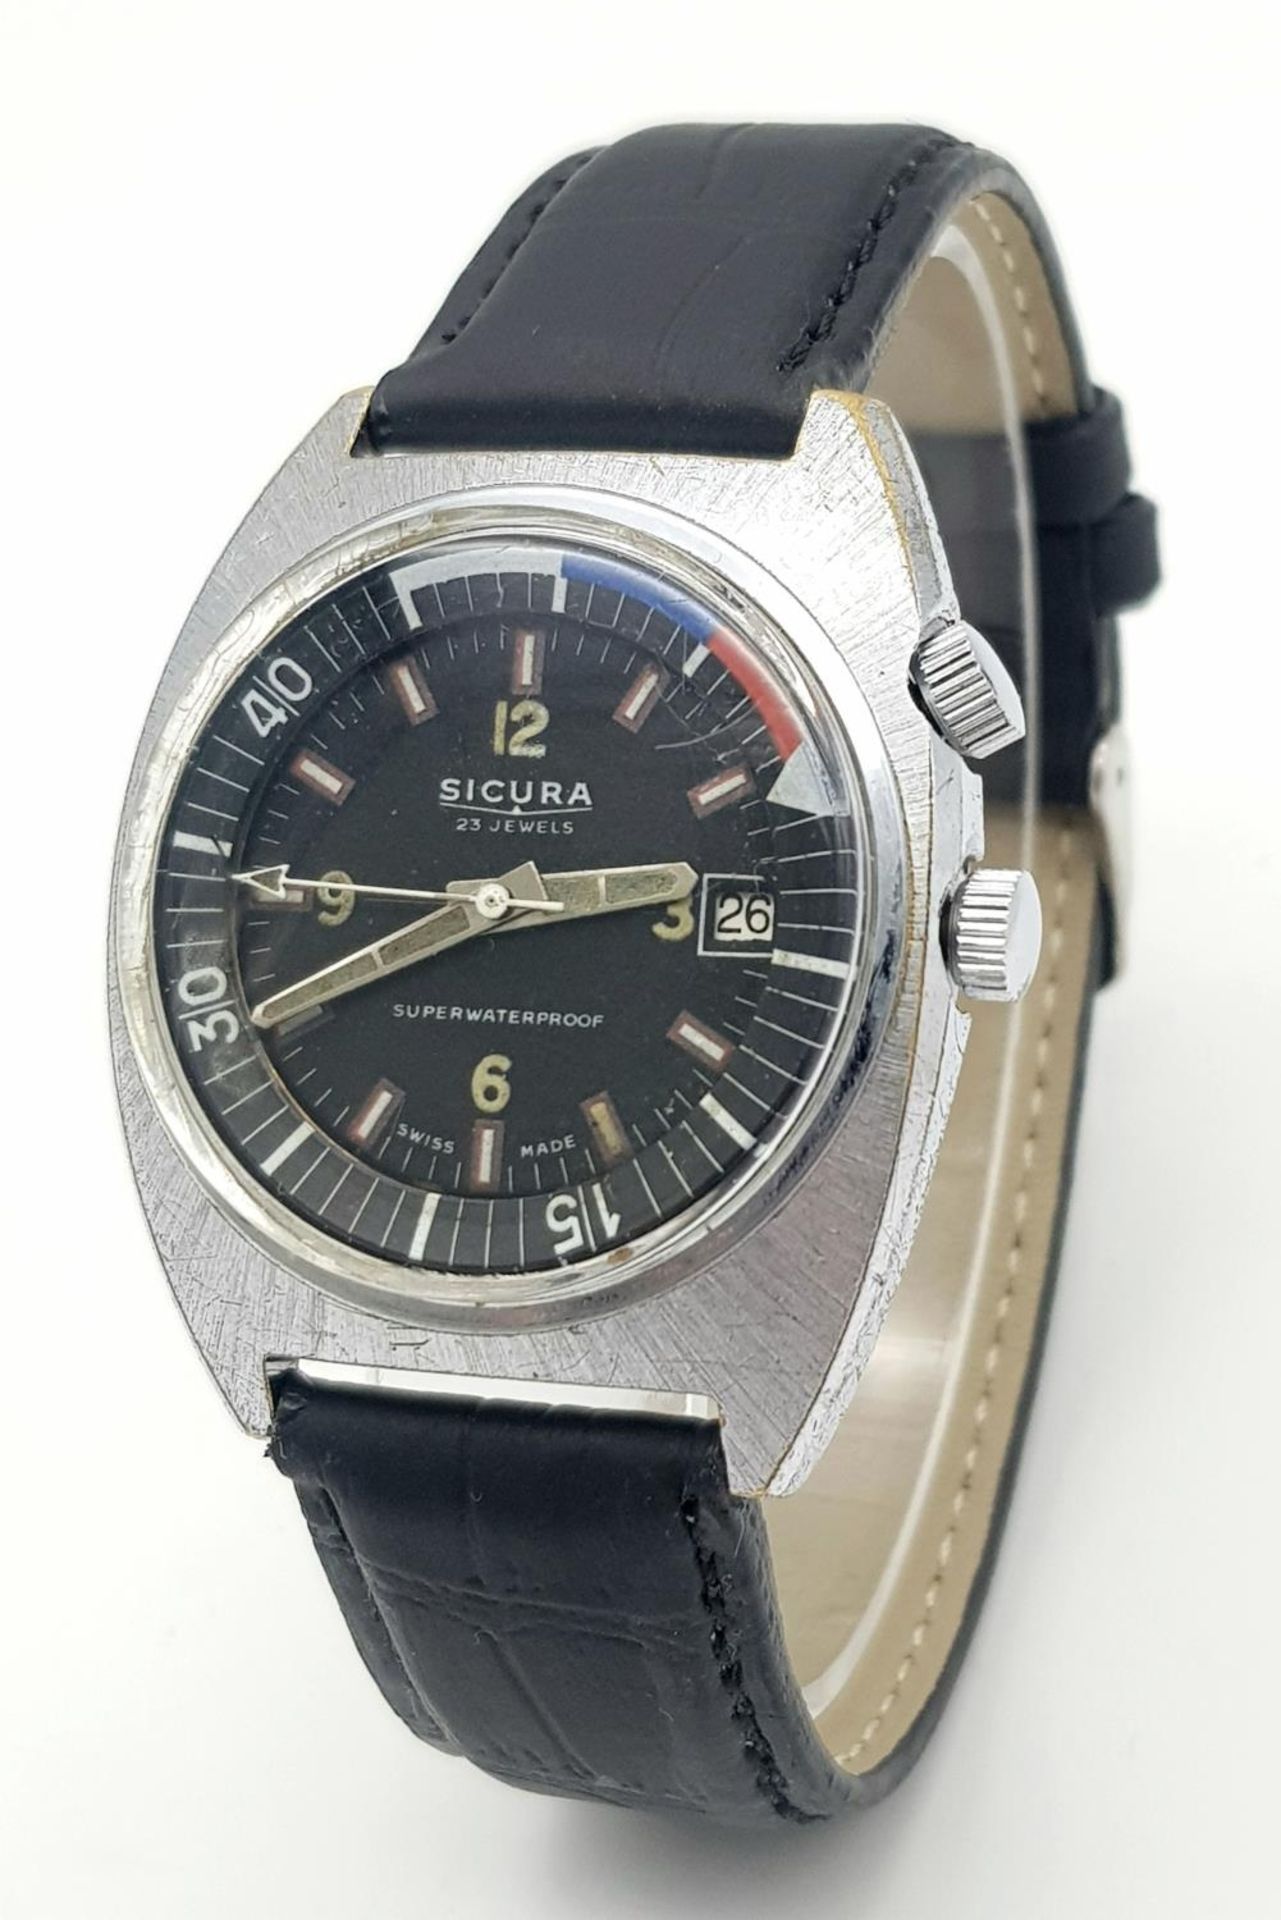 A Vintage Secura 23 Jewels Mechanical Gents Watch. Black leather strap. Stainless steel case - 38mm. - Image 2 of 5